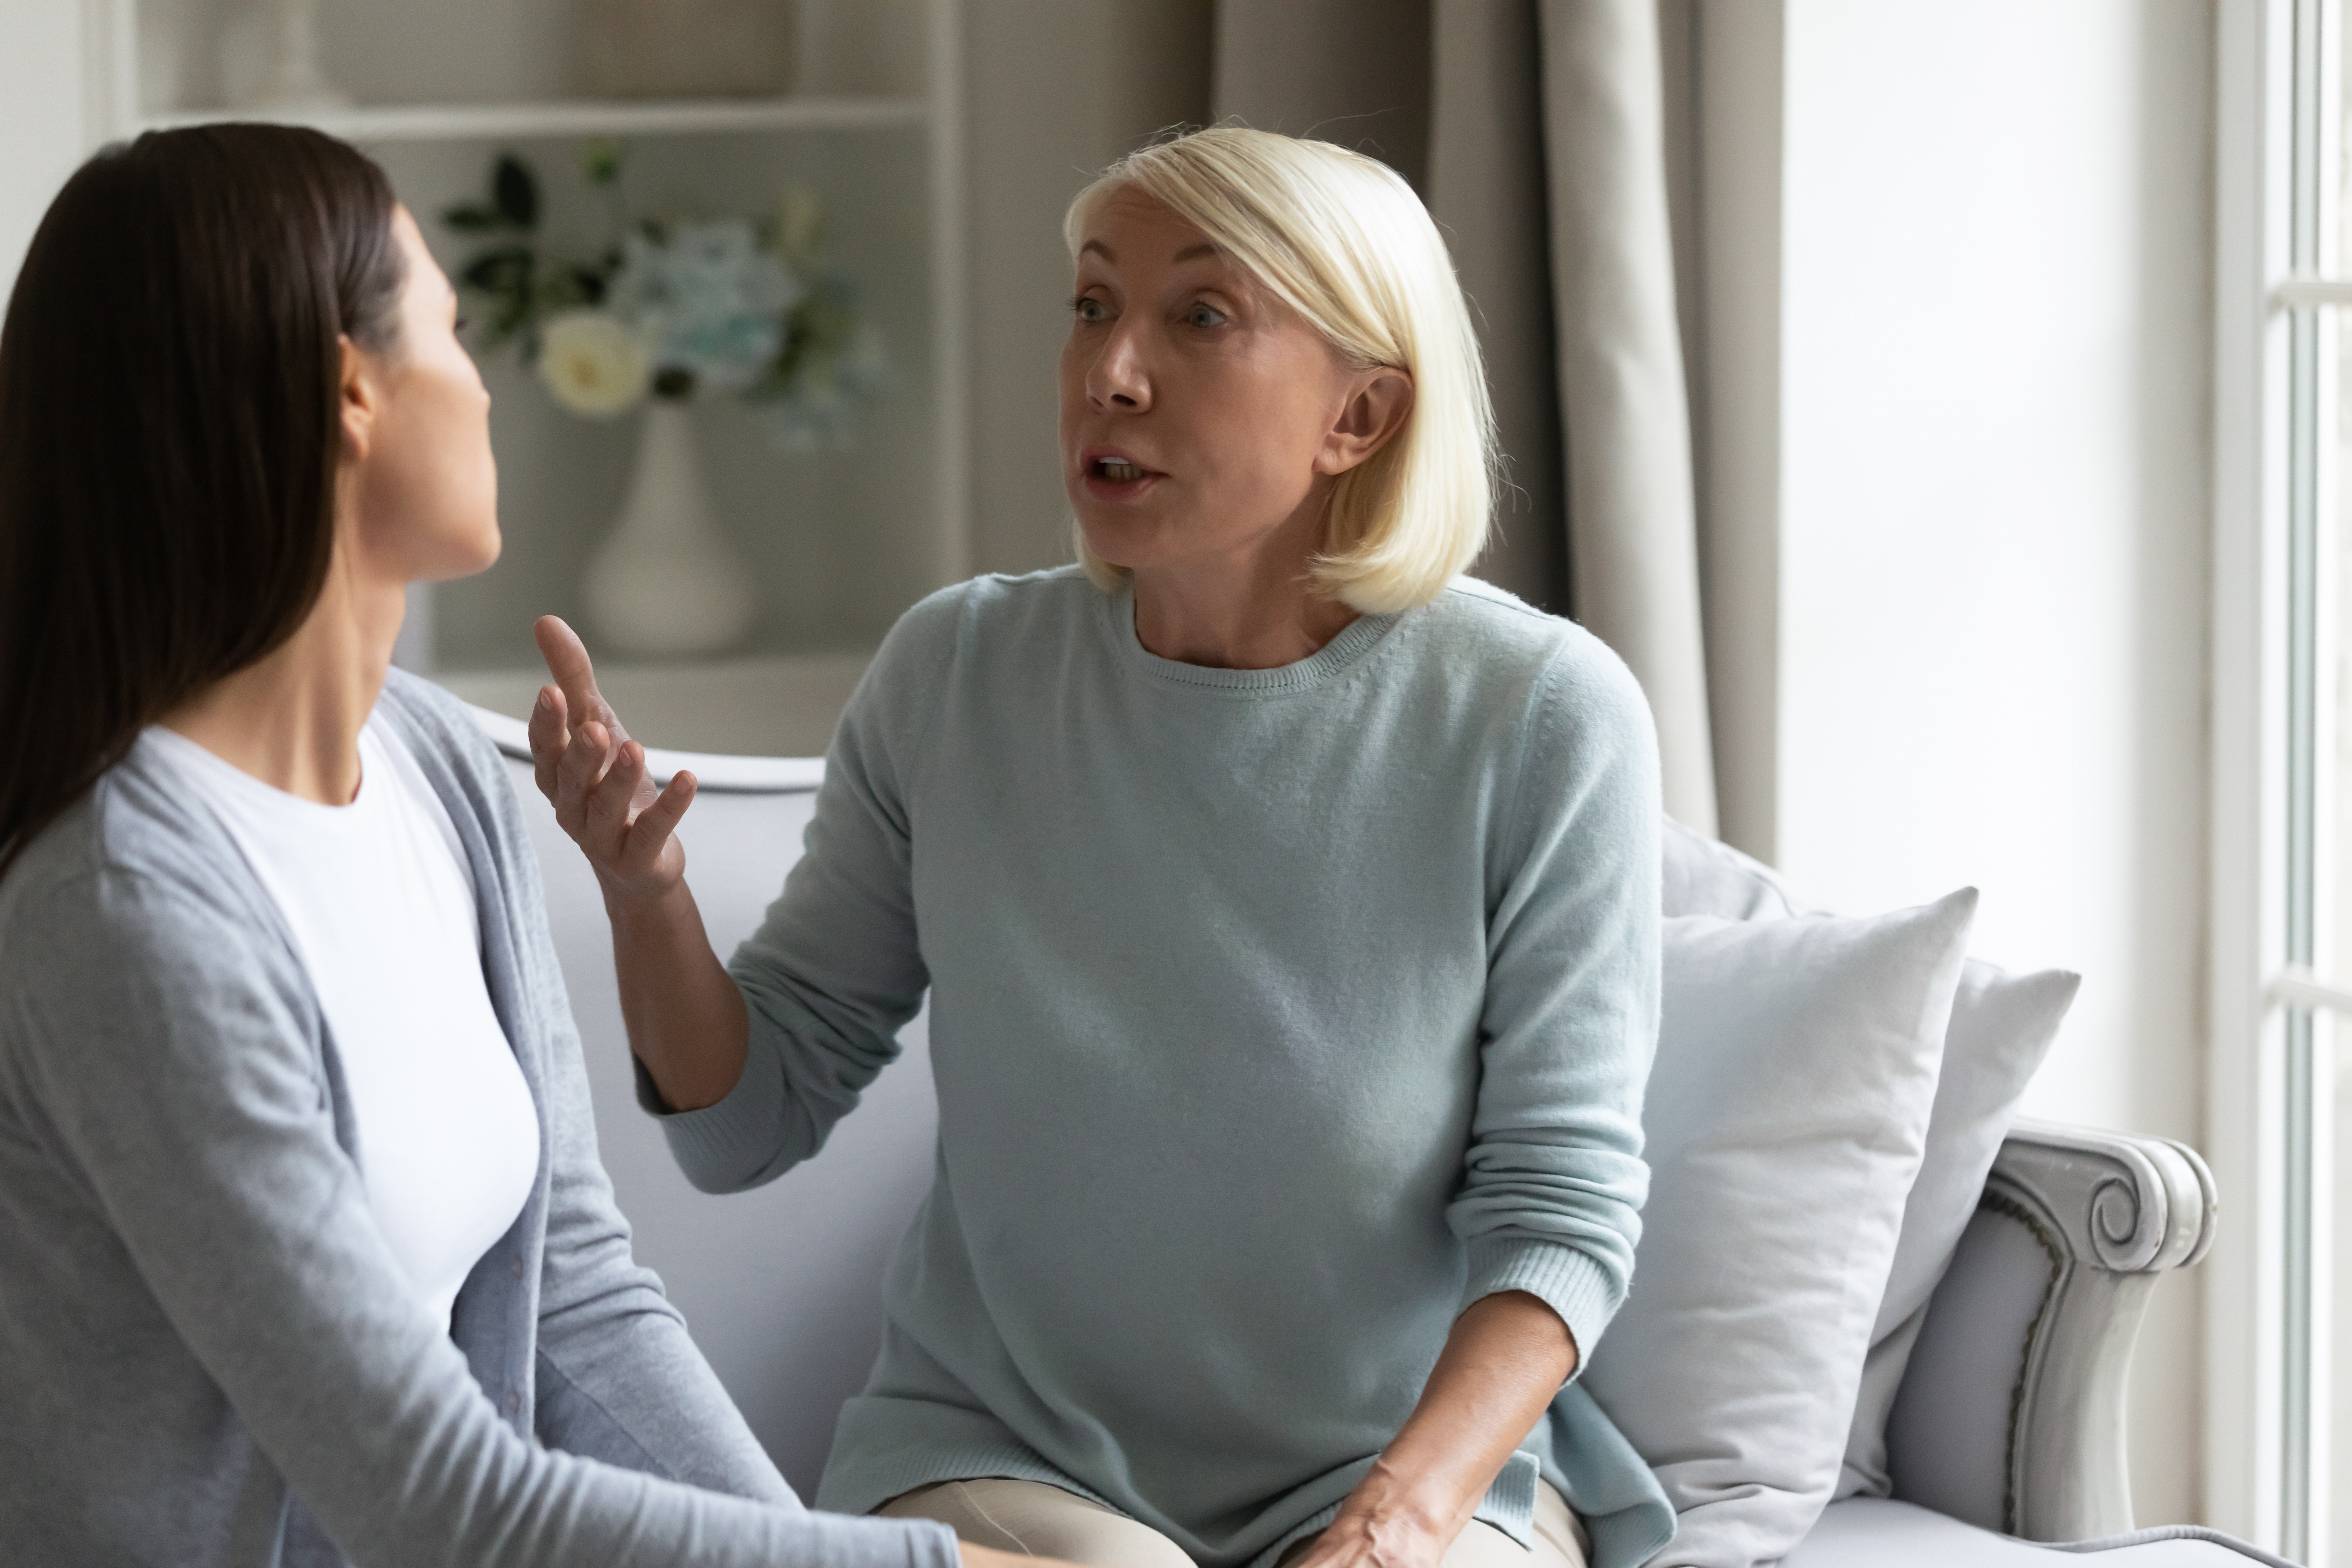 An angry 50s mother having a dispute with grown-up daughter | Source: Shutterstock